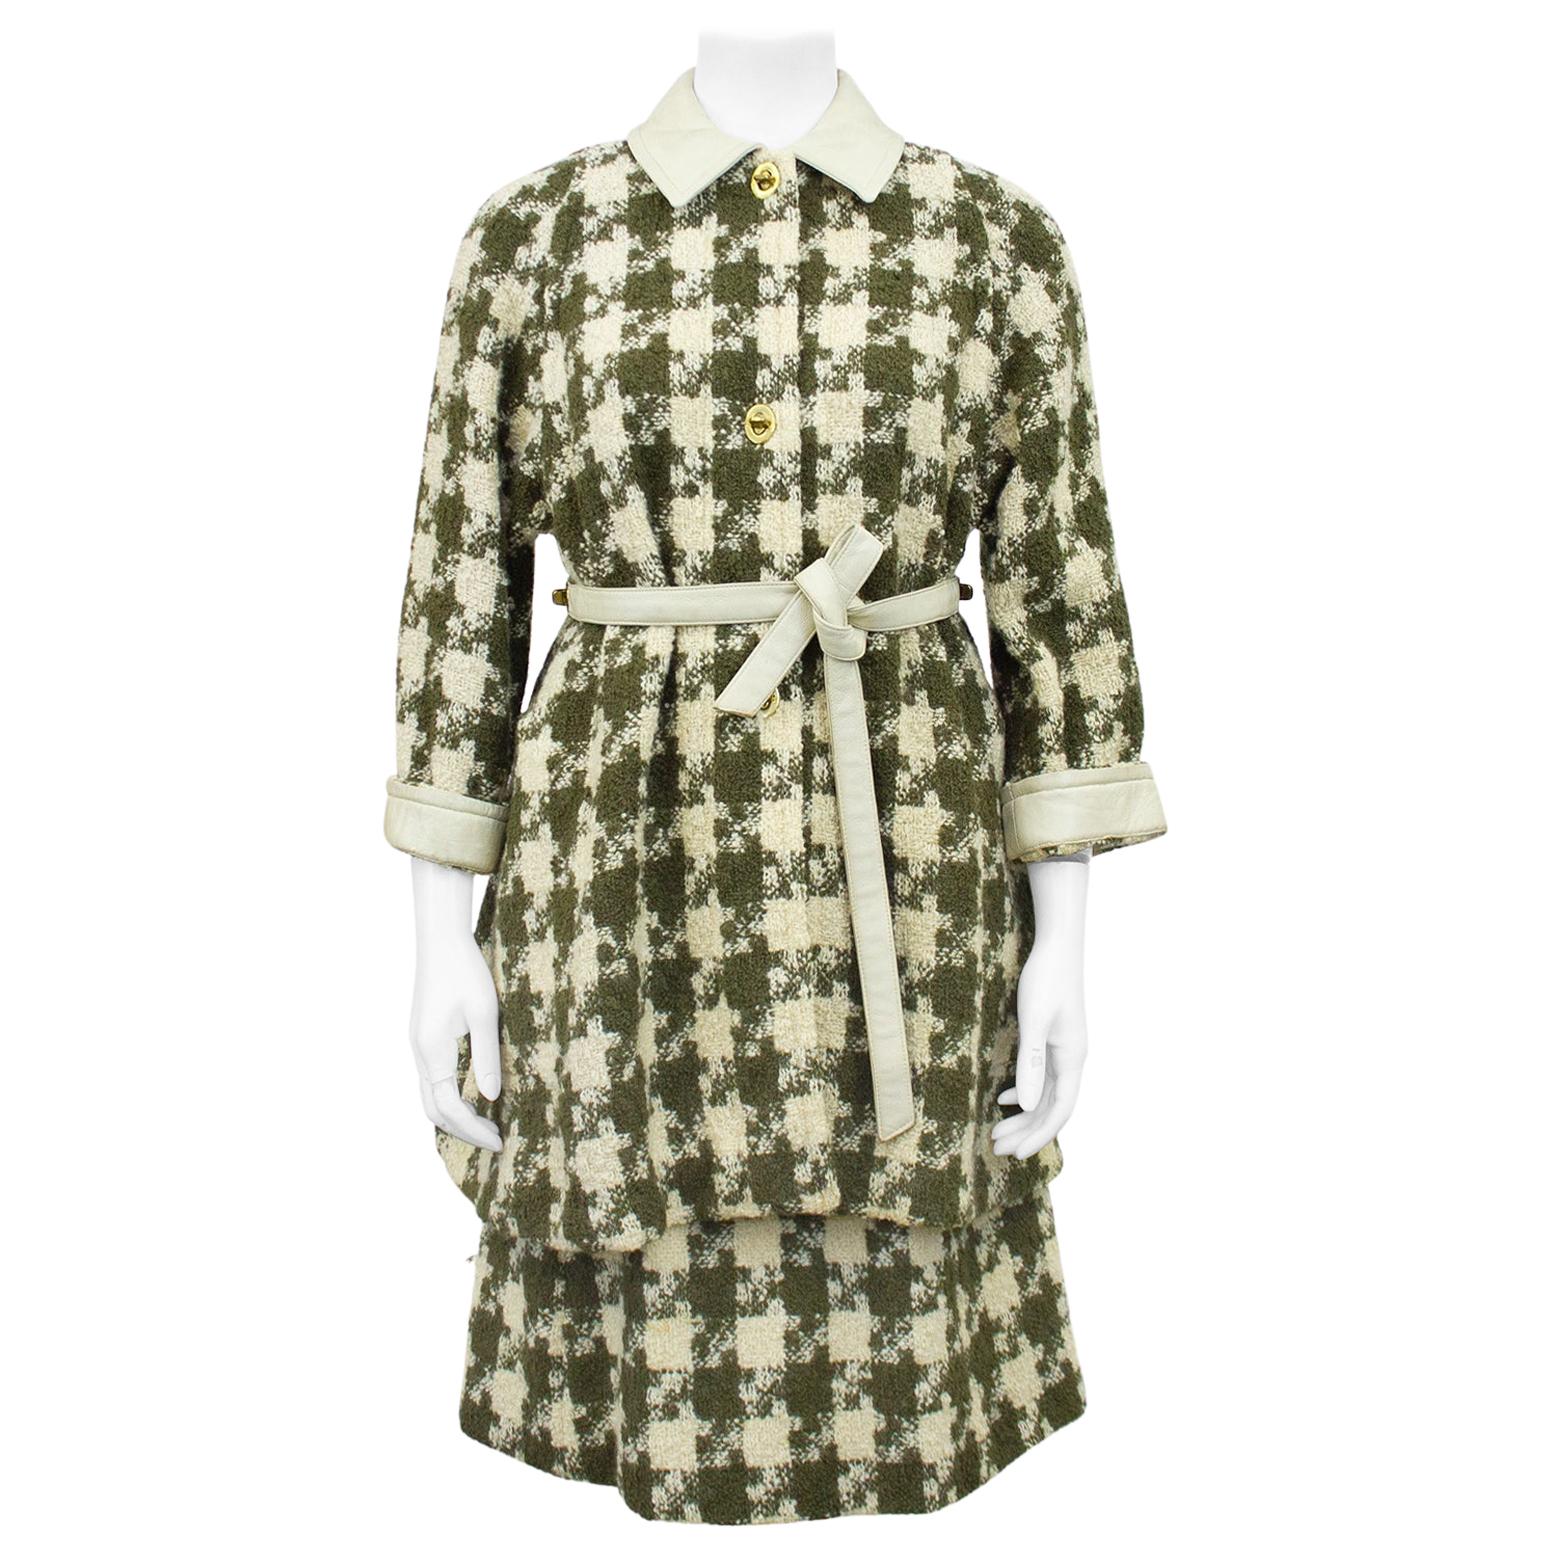 1970s Bonnie Cashin Cream and Green Houndstooth Coat and Skirt Ensemble 